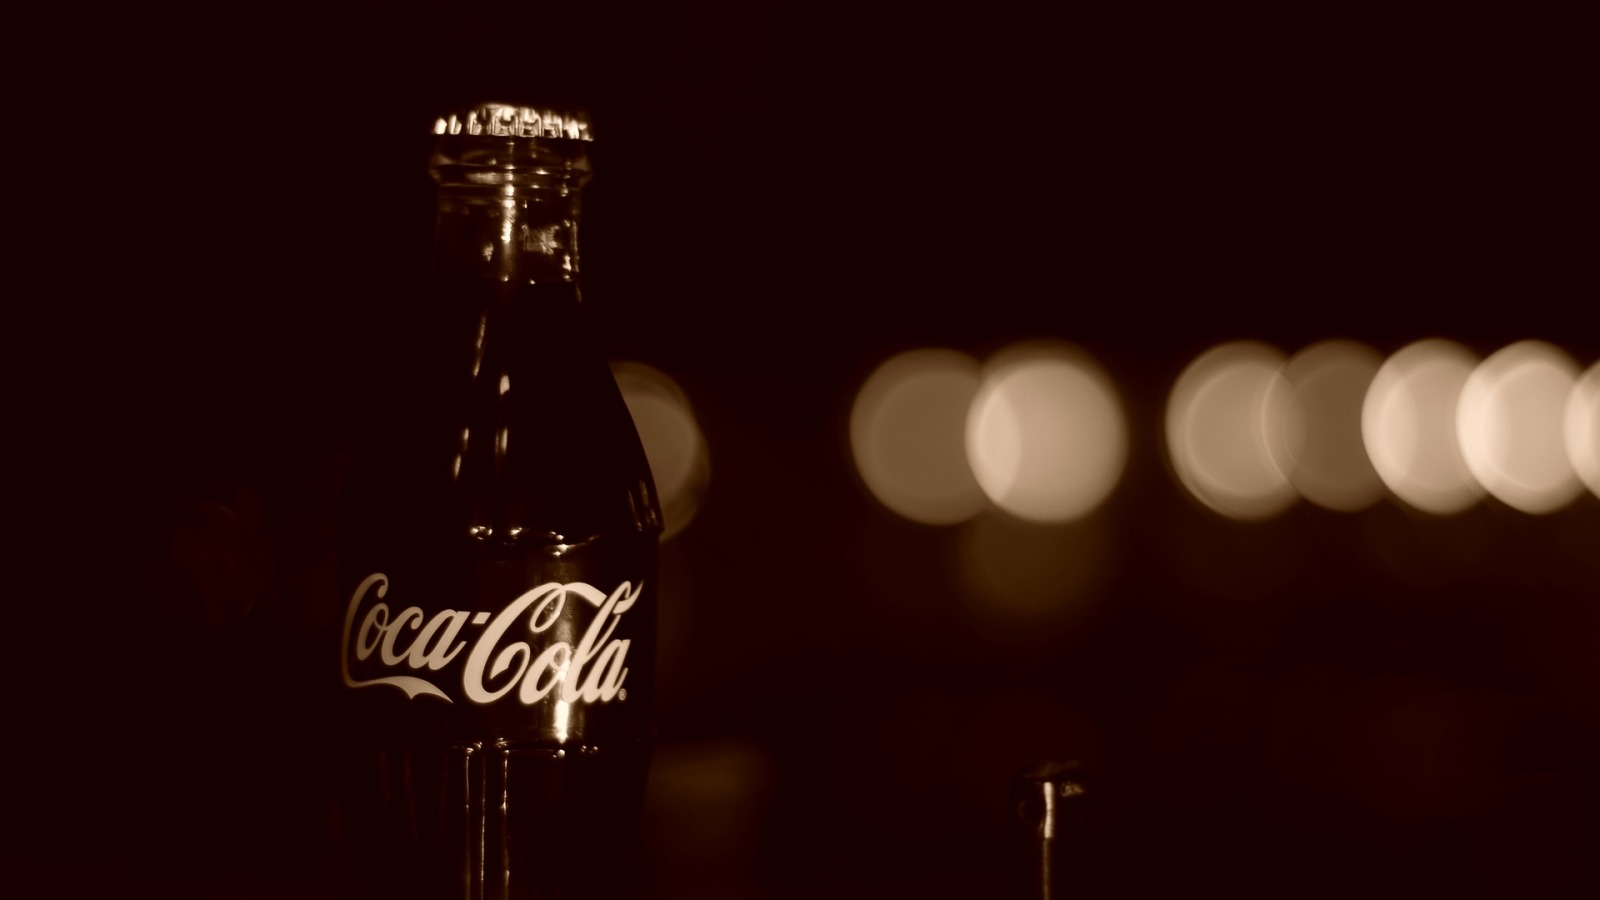 Gorgeous Coca Cola Wallpaper Full HD Pictures